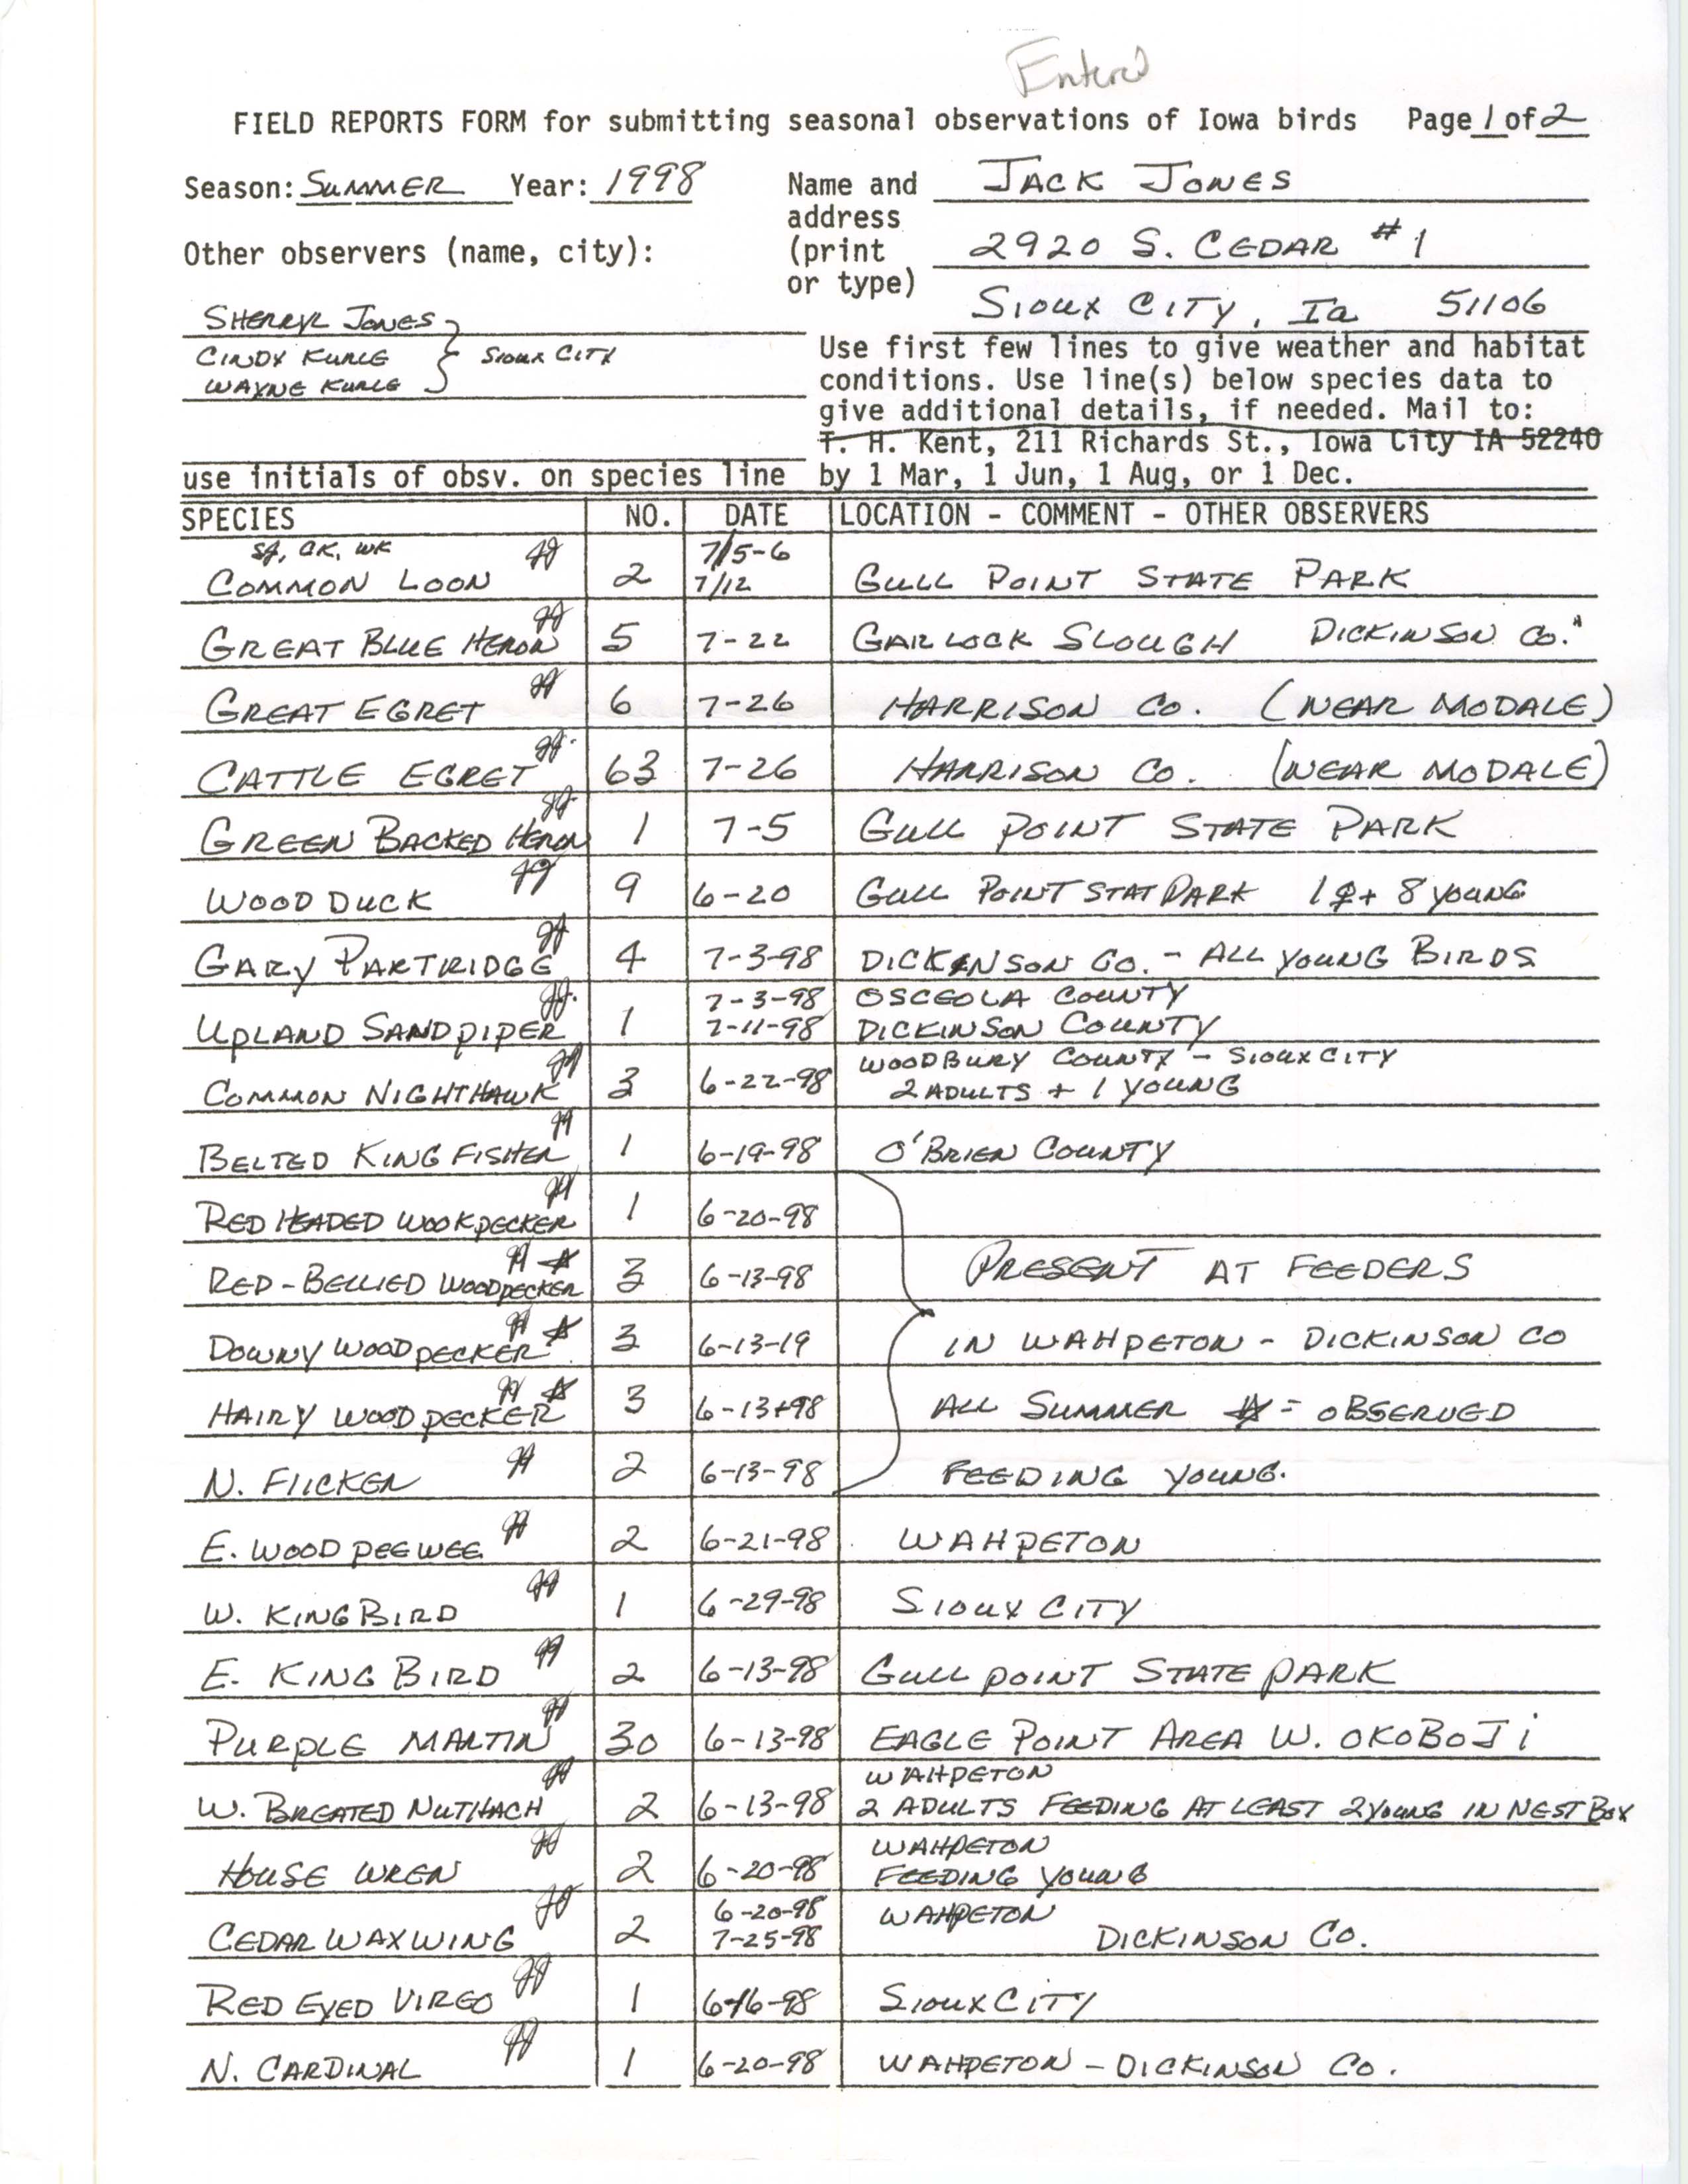 Field reports form for submitting seasonal observations of Iowa birds, Jack Jones, summer 1998